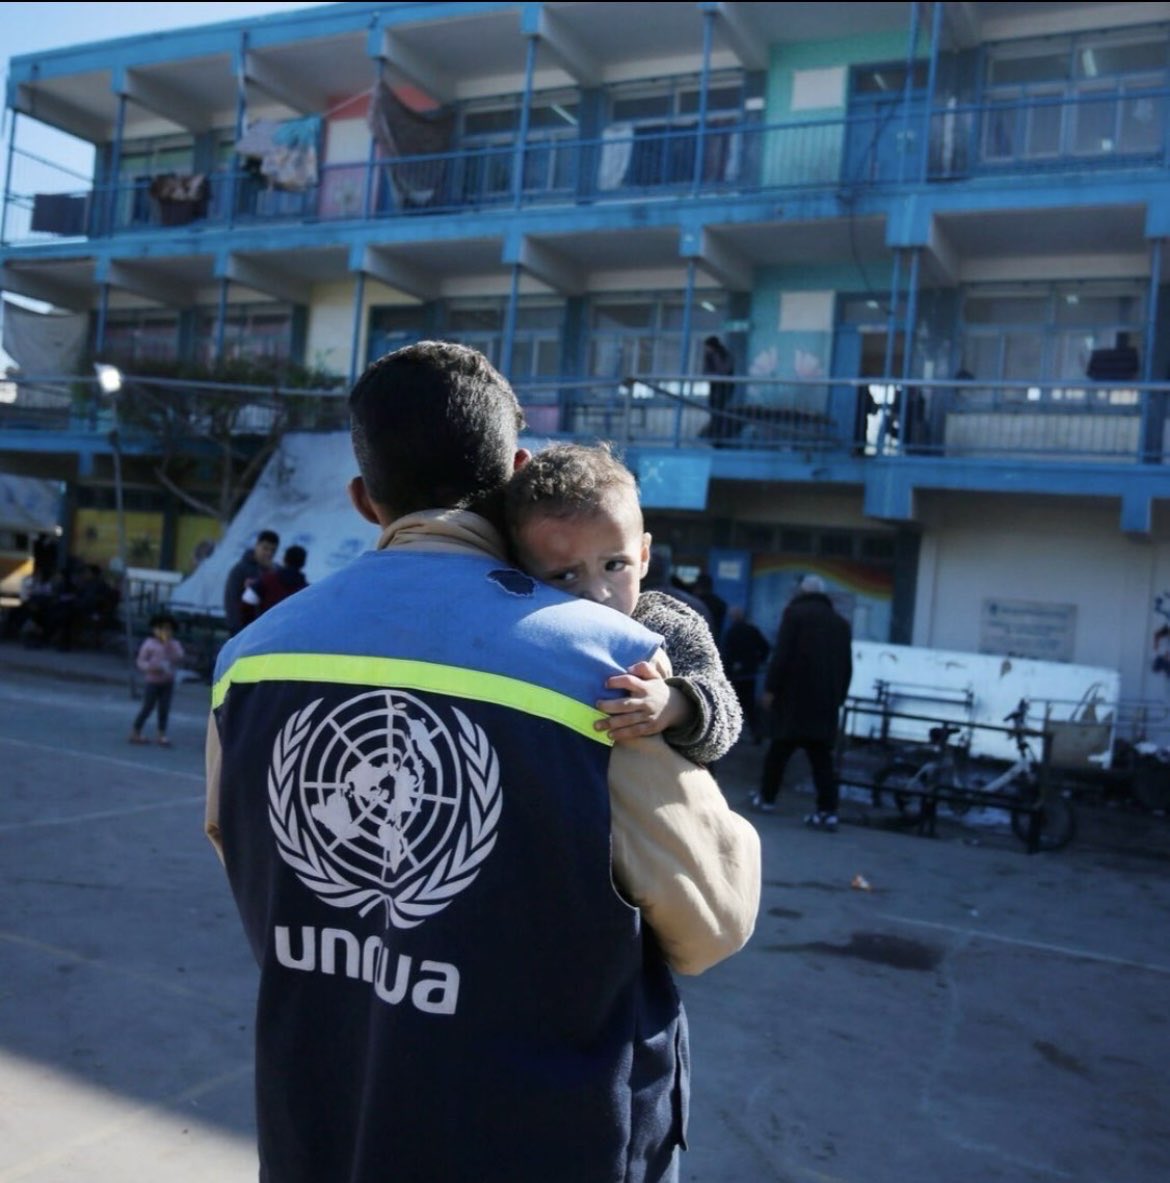 I welcome the decisions by the @EU_Commission, @SweMFA & @CanadaFP to continue their funding to @UNRWA. The situation is desperate. UNRWA is the lifeline for Gazans & crucial for Palestine refugees across the Middle East. The UN has addressed accusations in a timely manner.